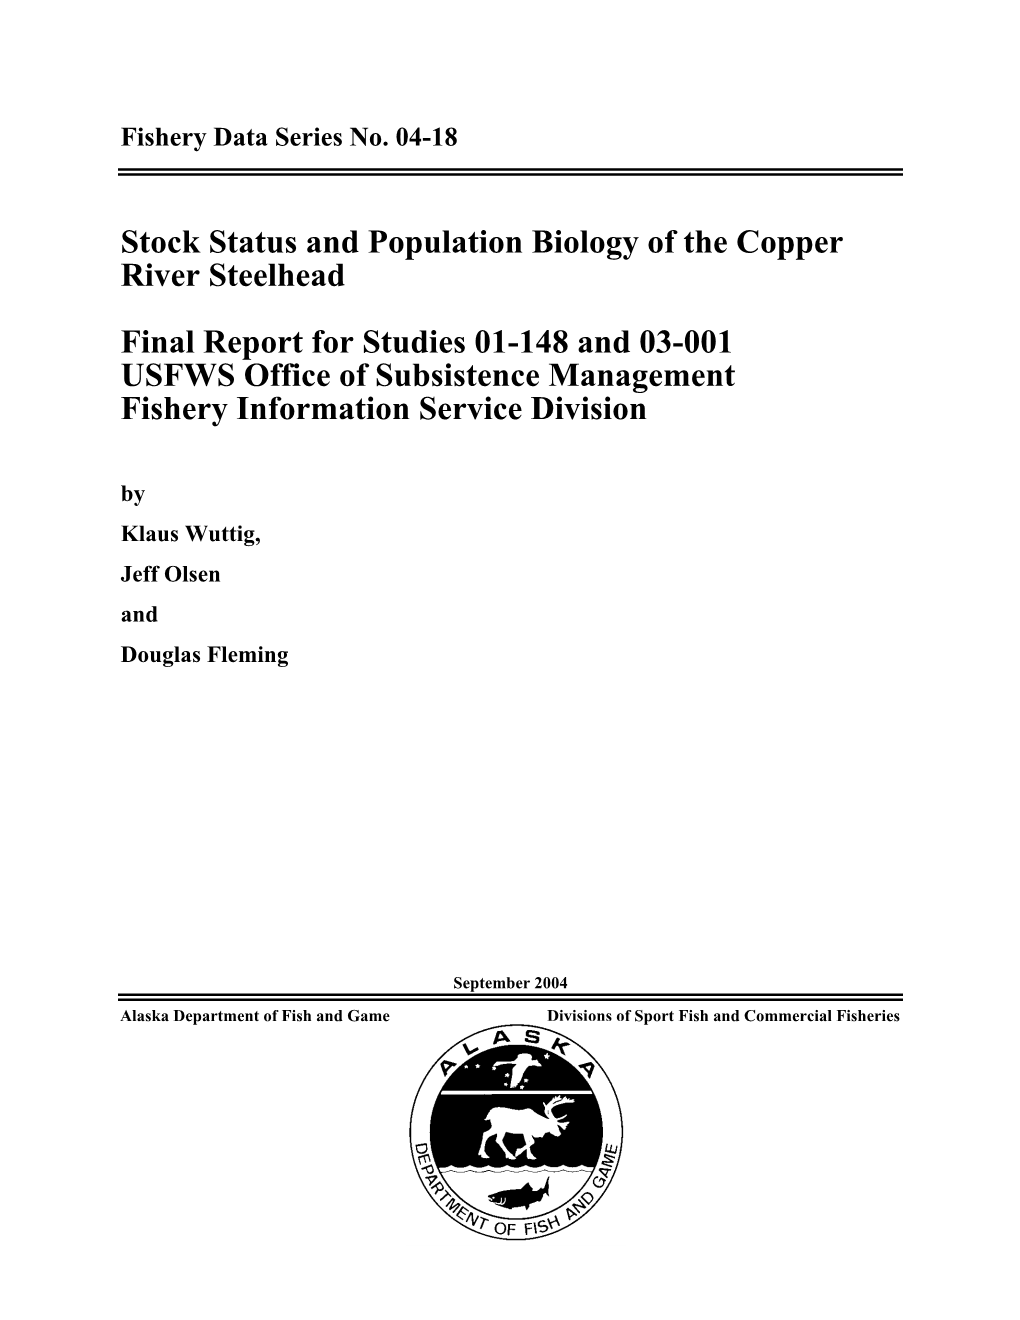 Stock Status and Population Biology of the Copper River Steelhead